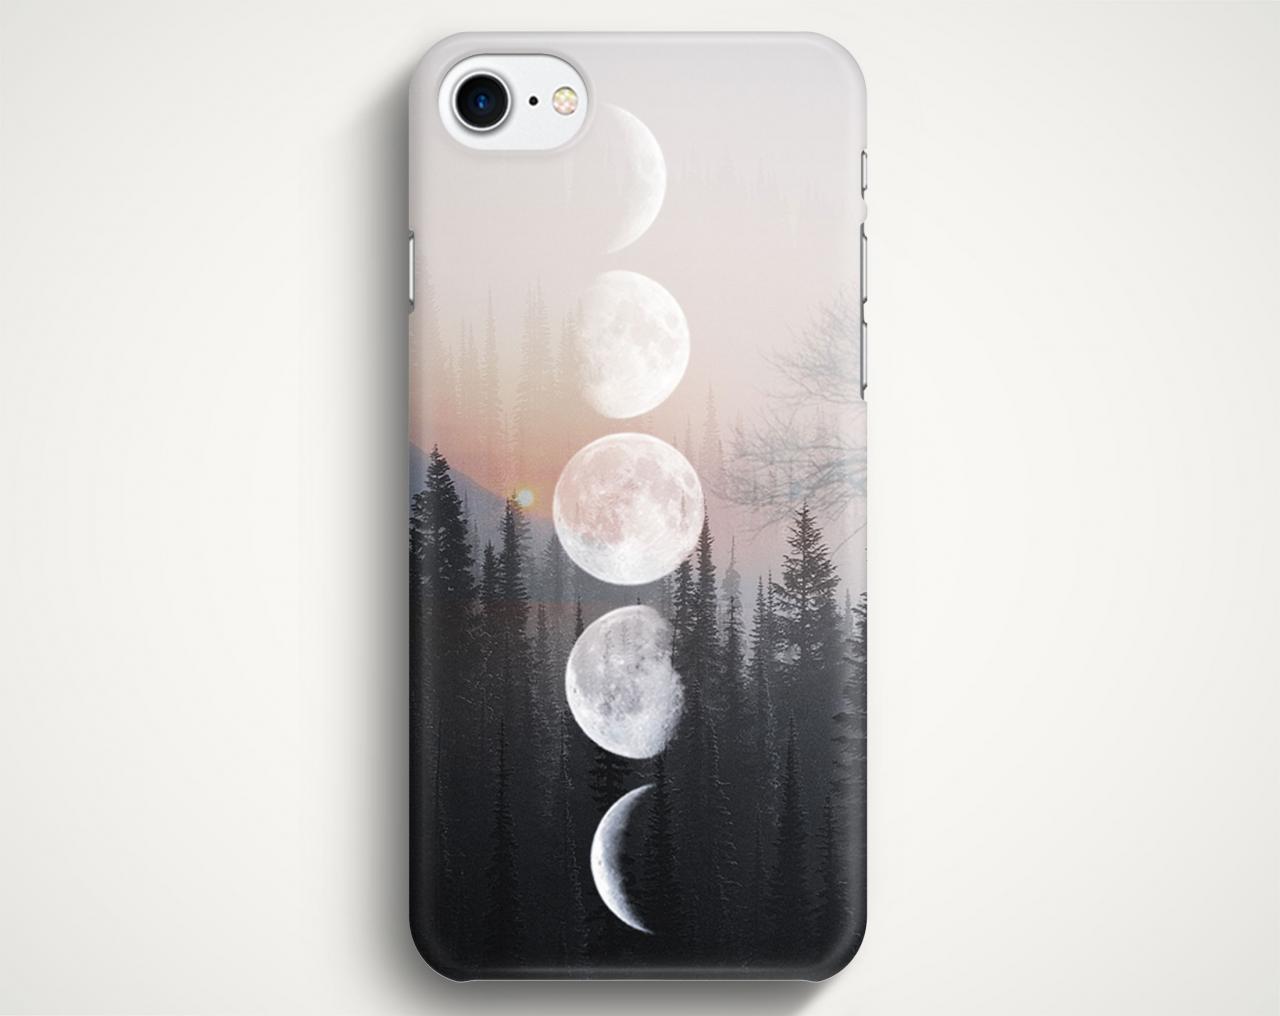 Moon Phases Forest Case For Iphone 7 Iphone 7 Plus Samsung Galaxy S8 Galaxy S7 Galaxy A3 Galaxy A5 Galaxy A7 Lg G6 Lg G5 Htc 10